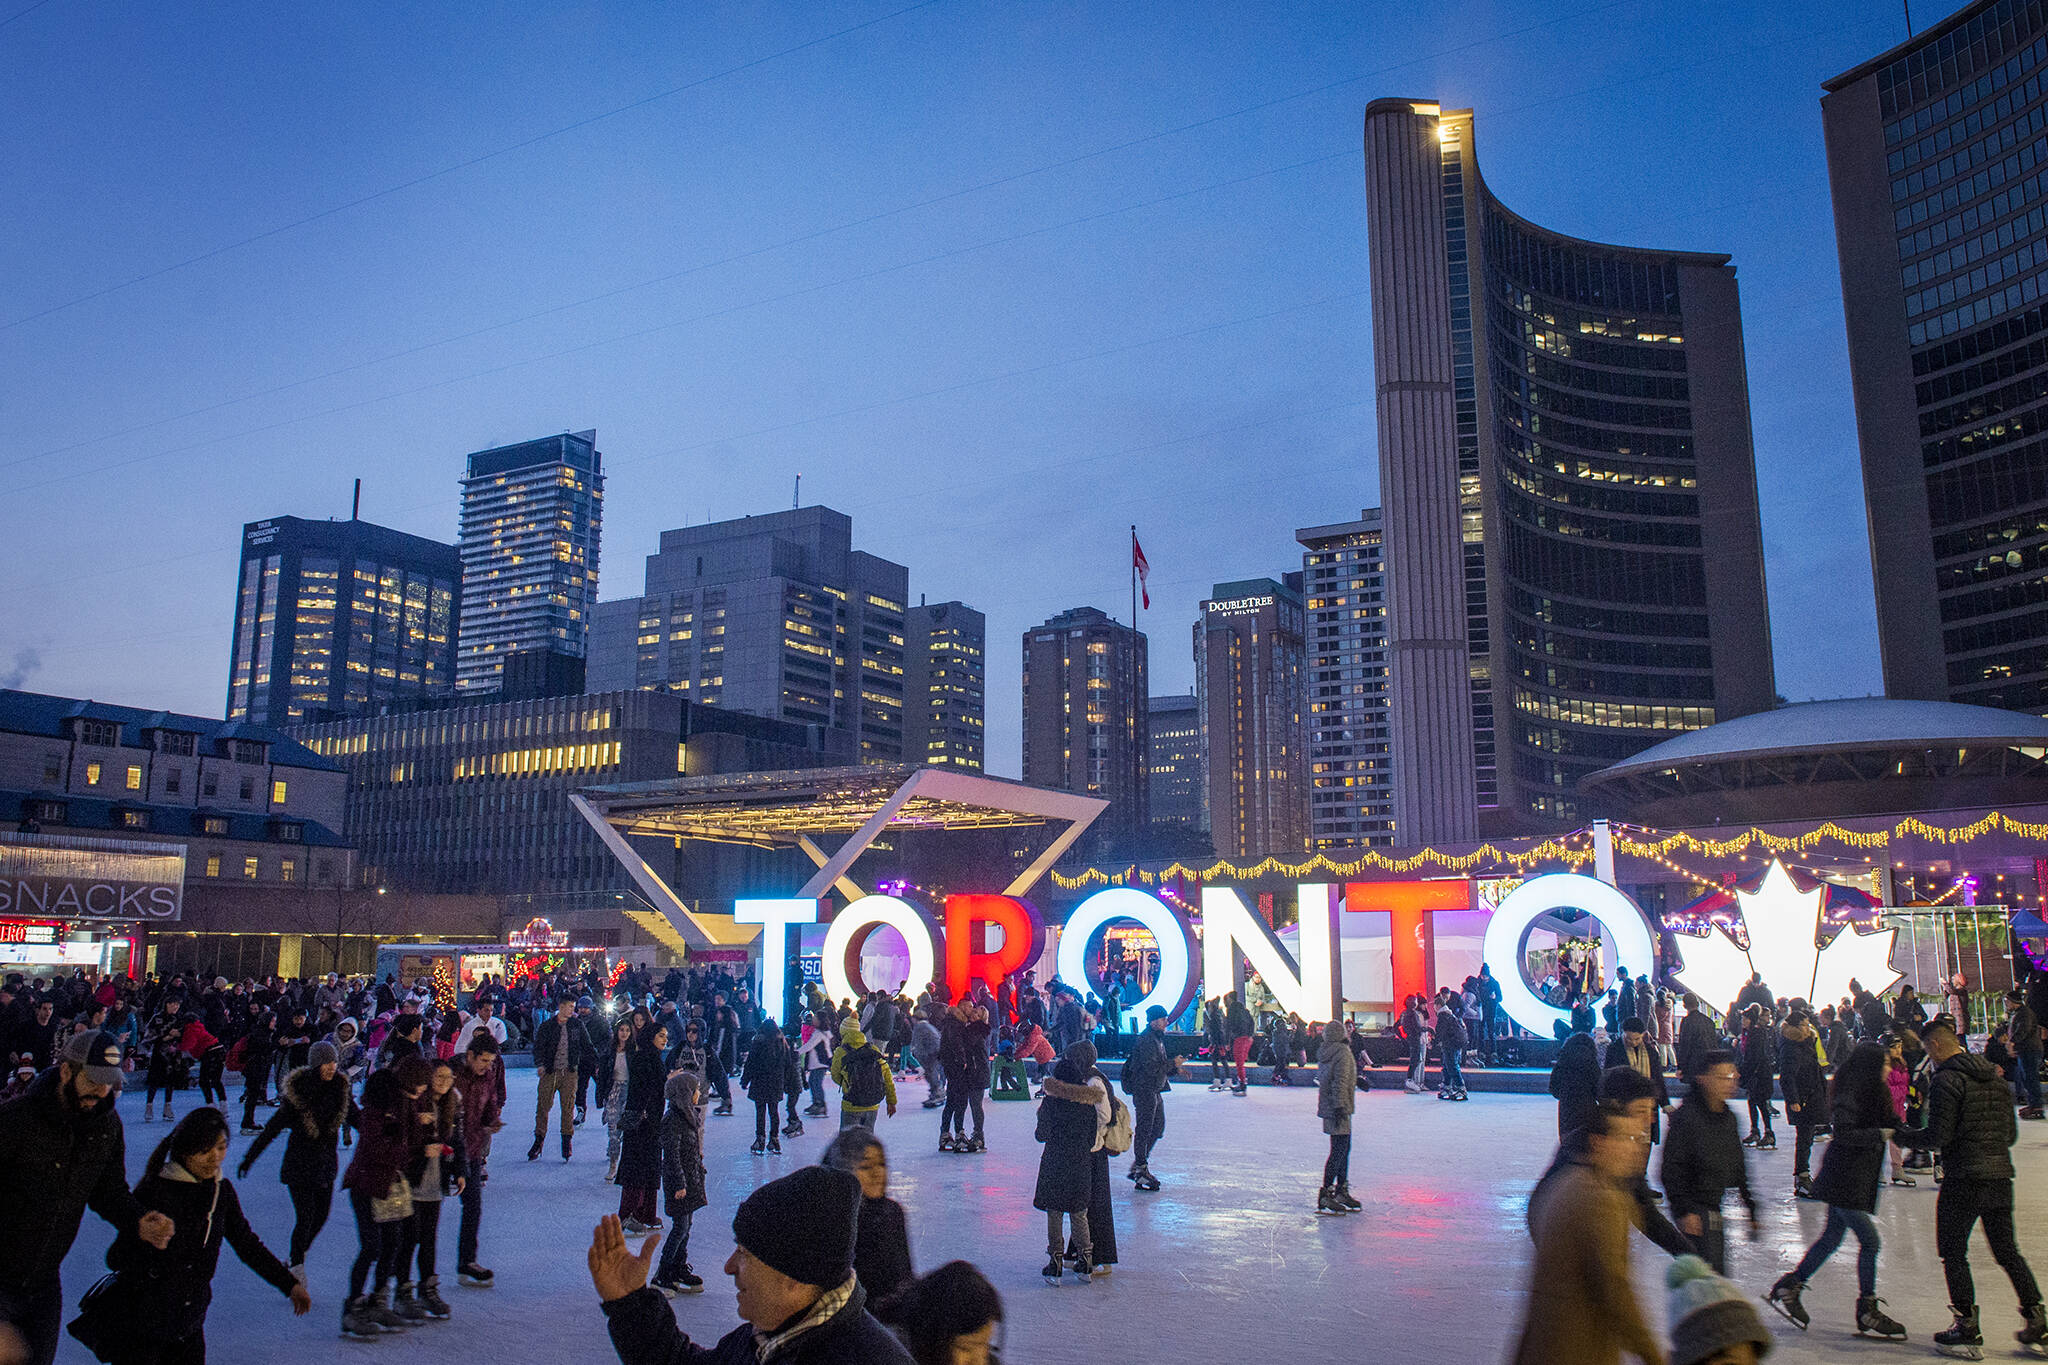 The top 10 rinks for late night skating in Toronto